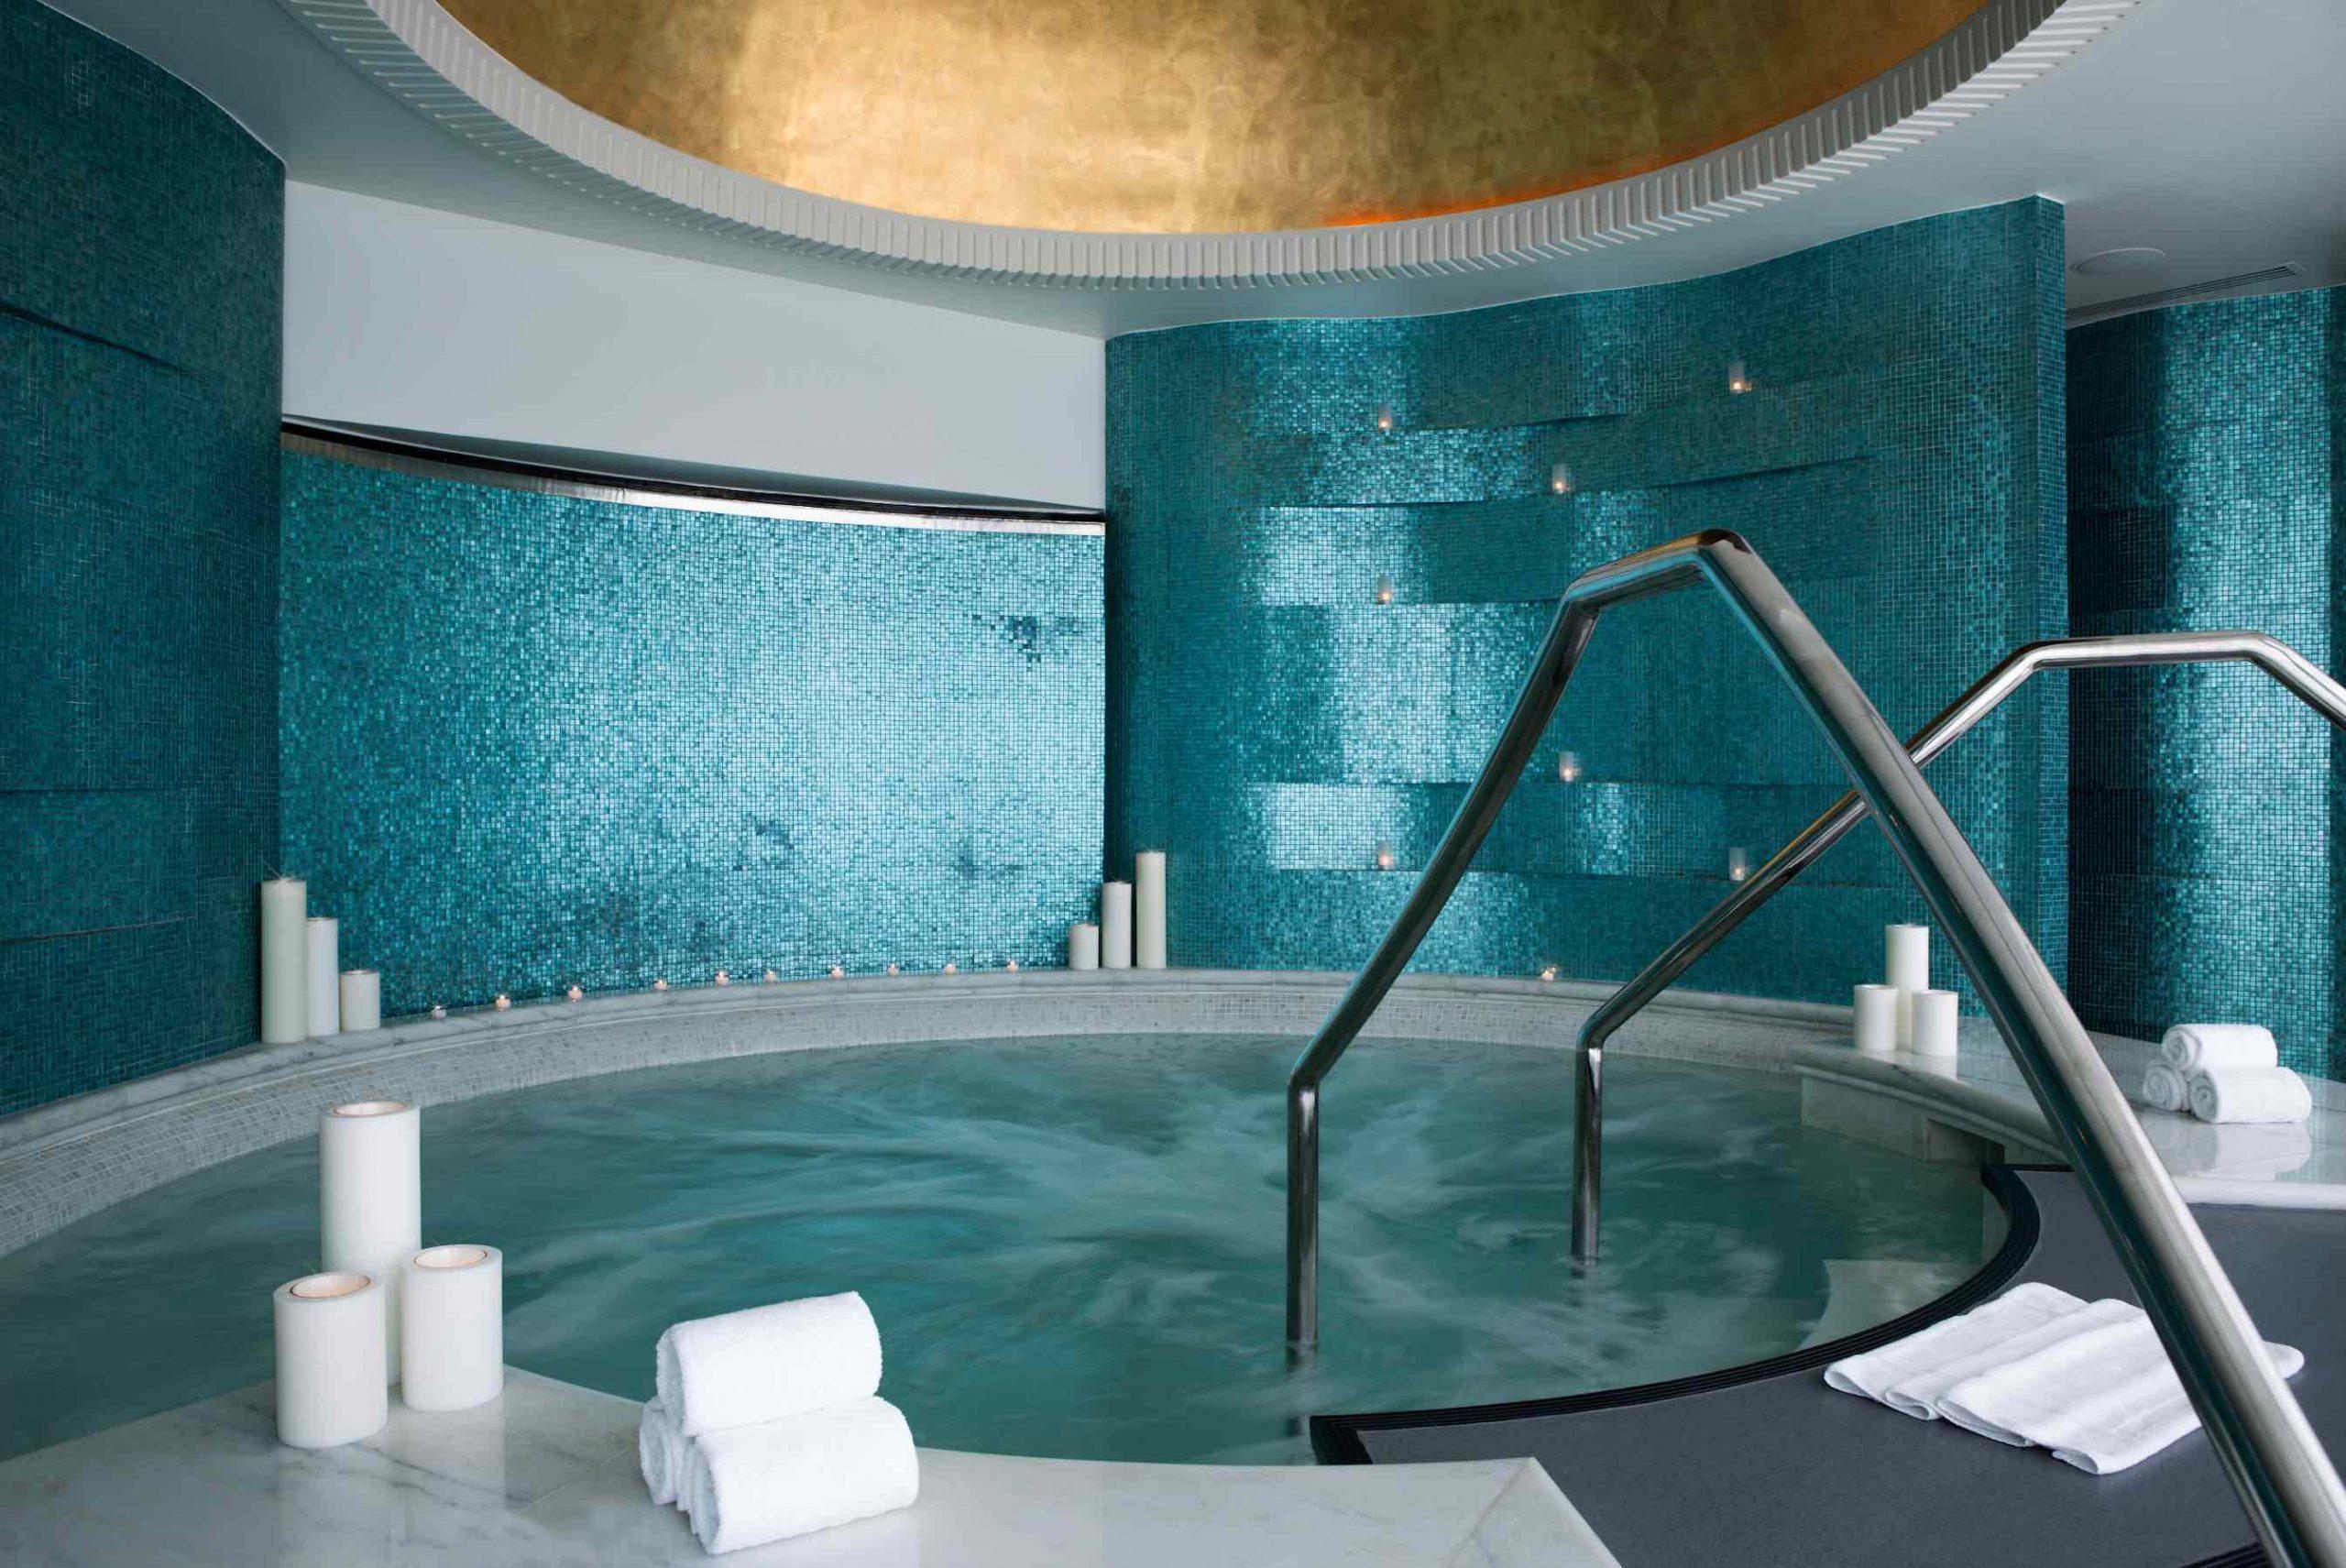 Surrender to serenity at The Spa at The St. Regis Abu Dhabi